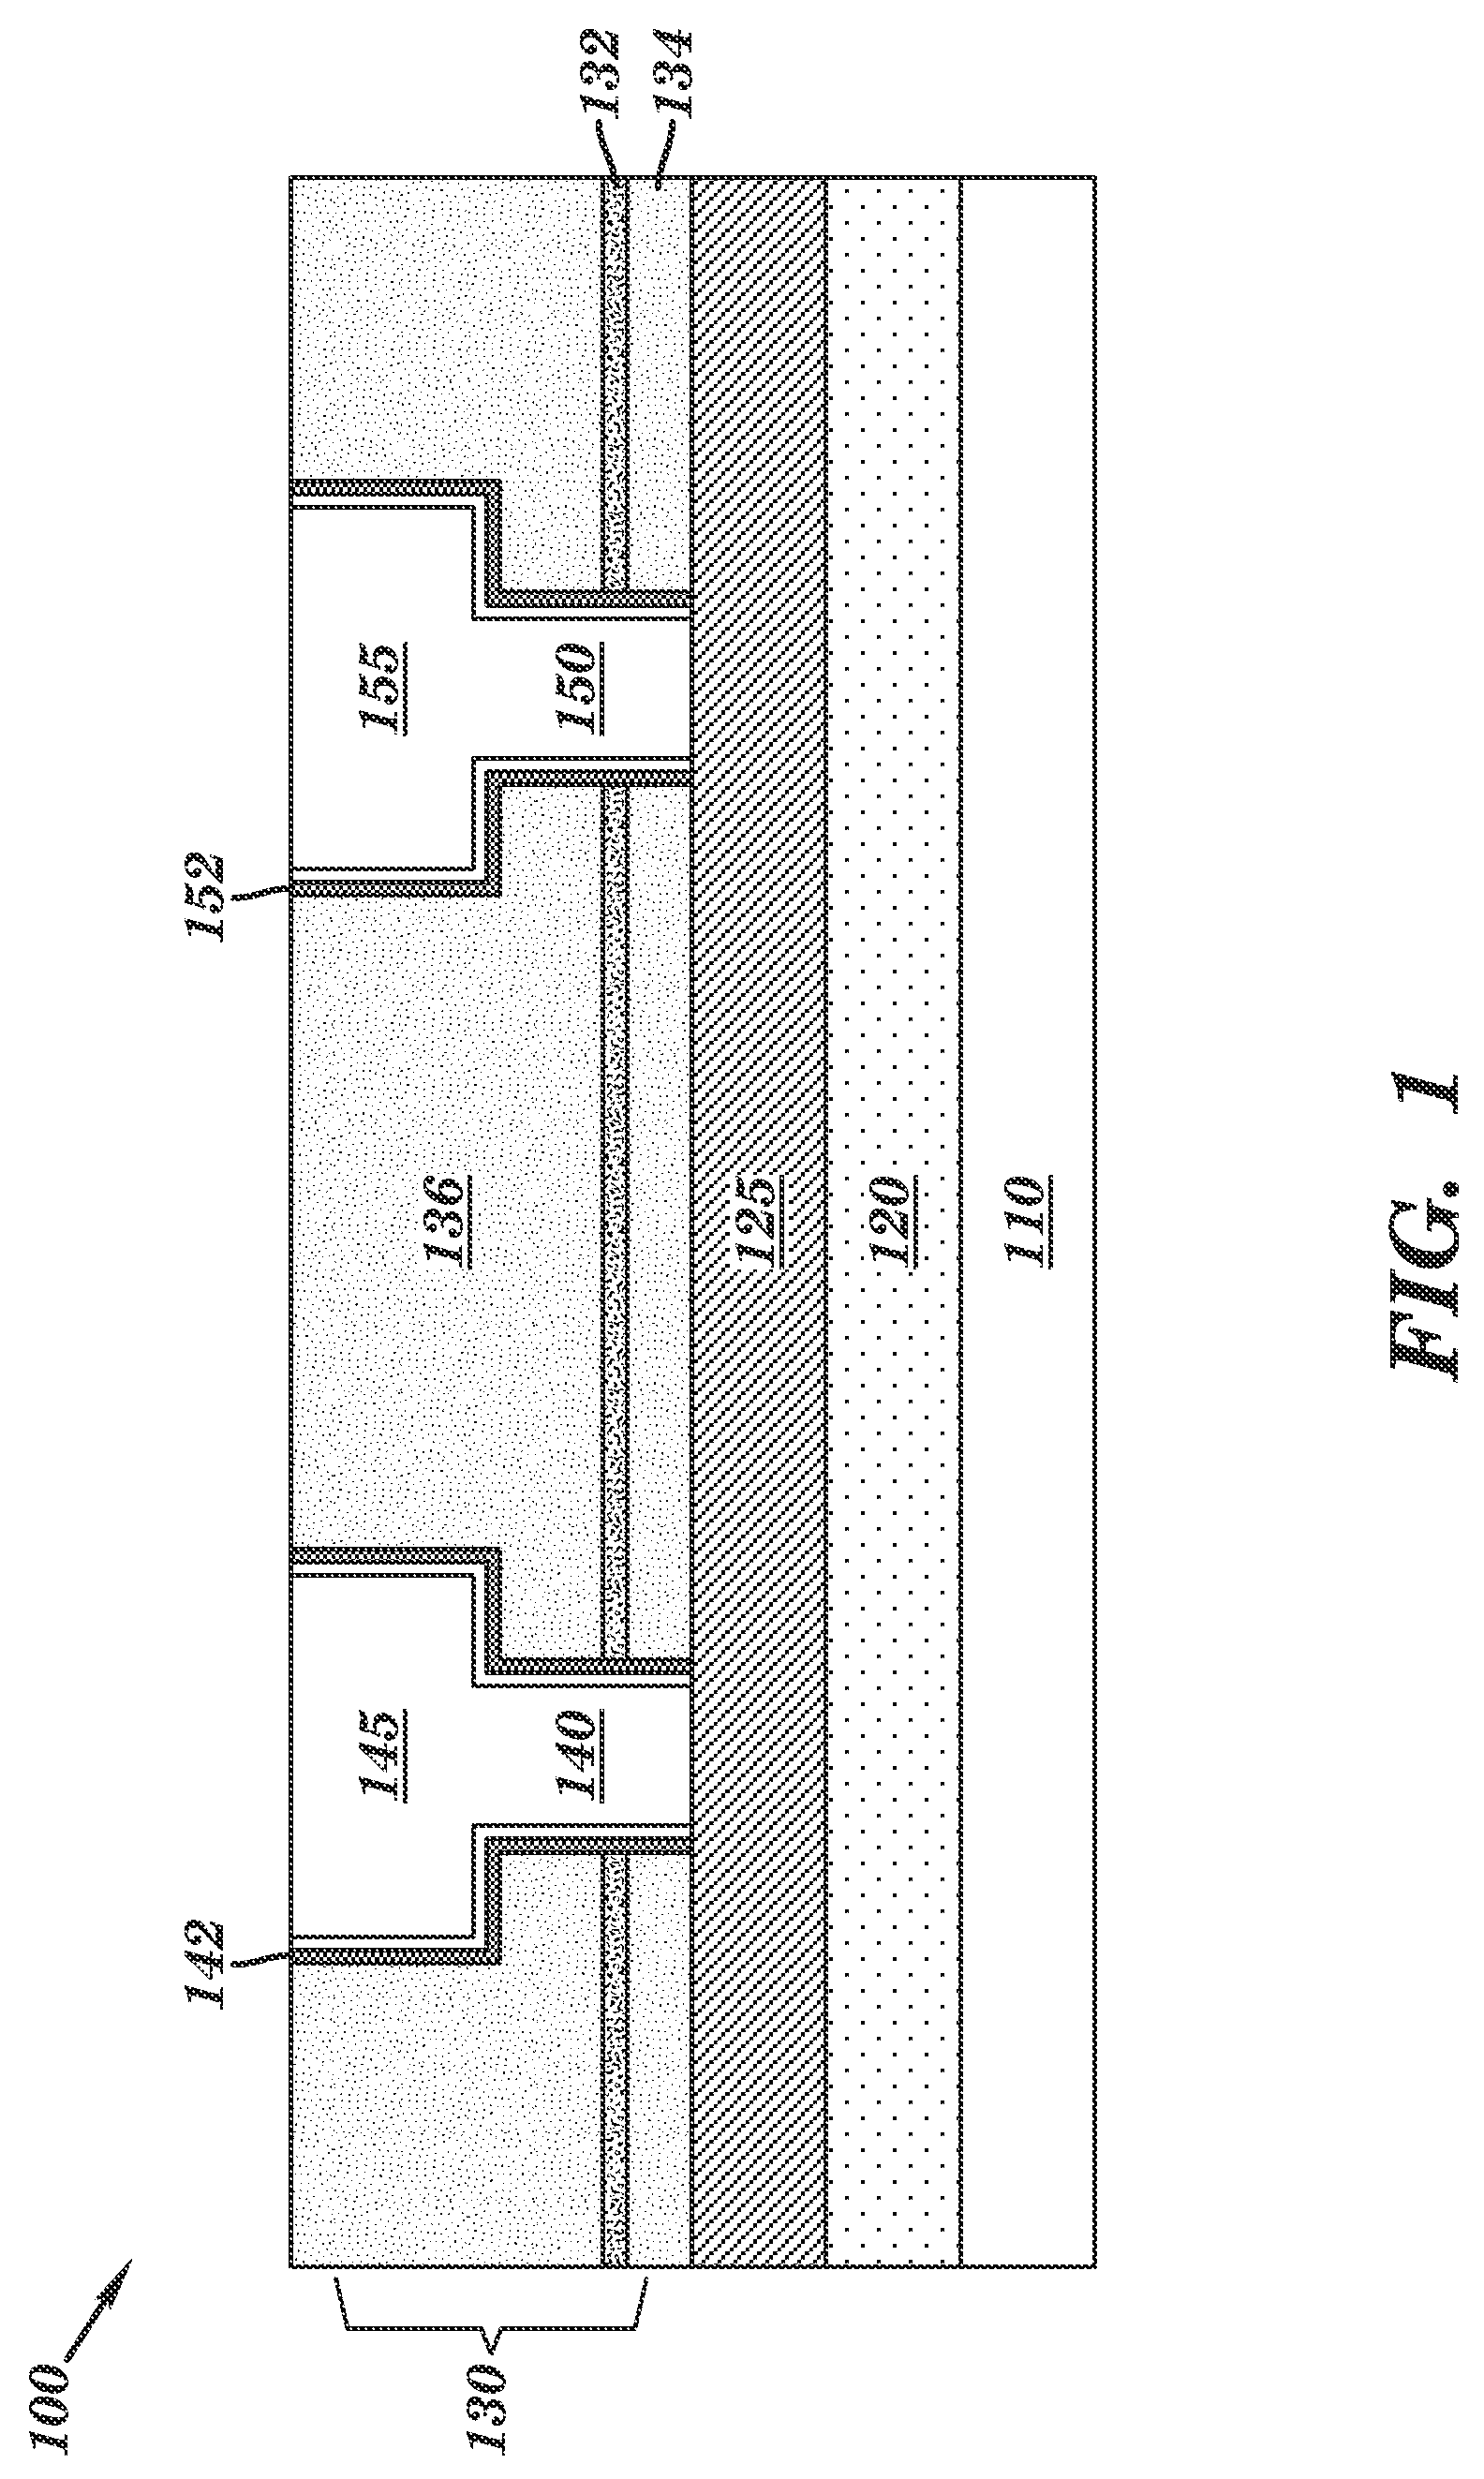 Interlevel dielectric stack for interconnect structures